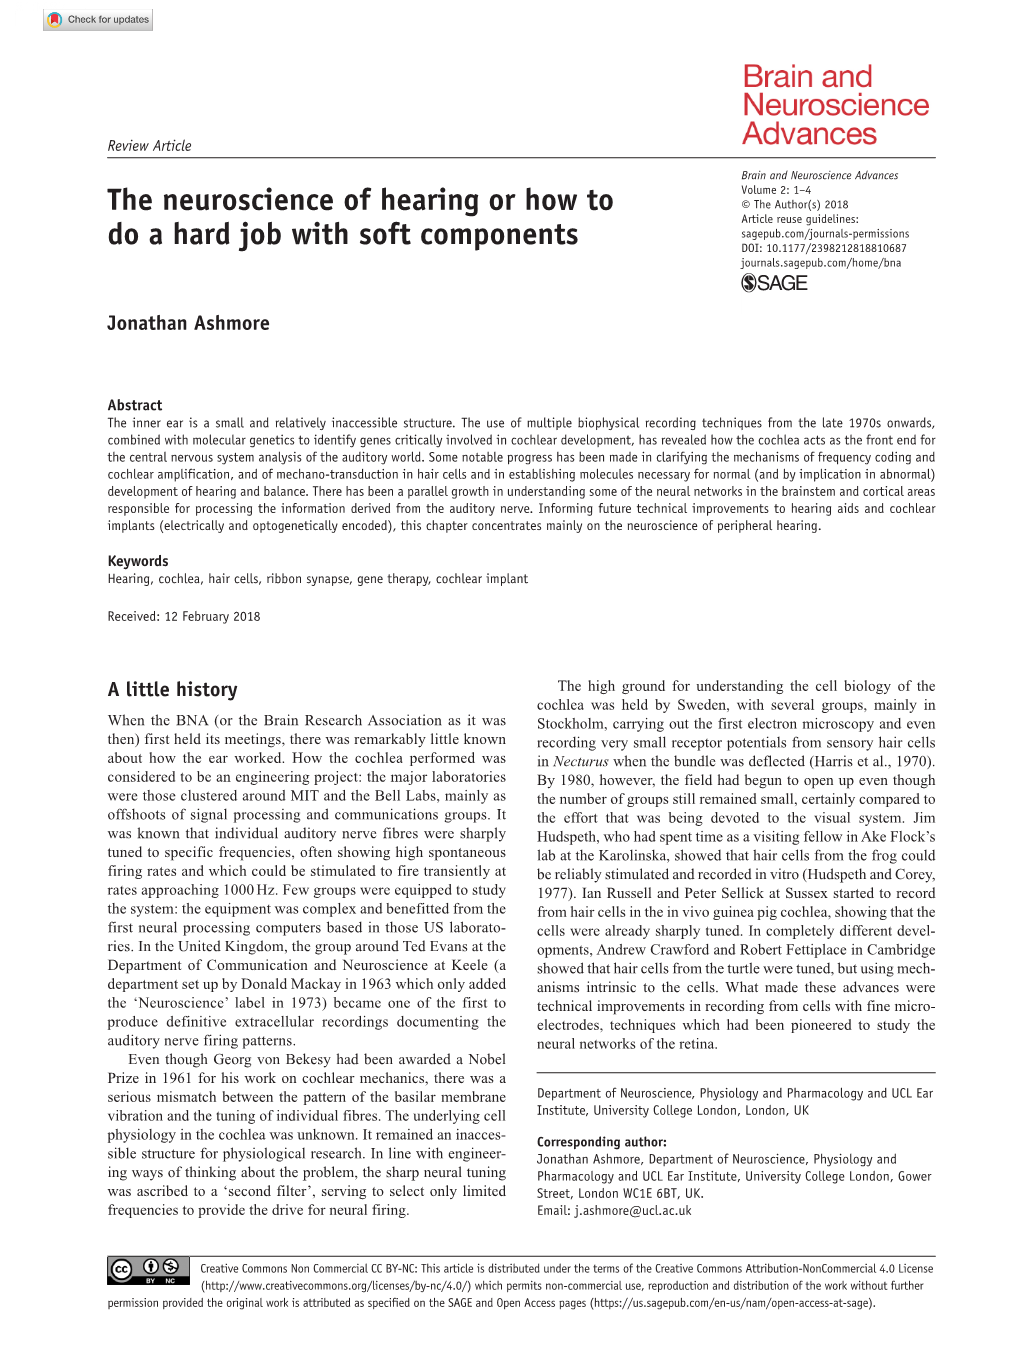 The Neuroscience of Hearing Or How to Do a Hard Job with Soft Components